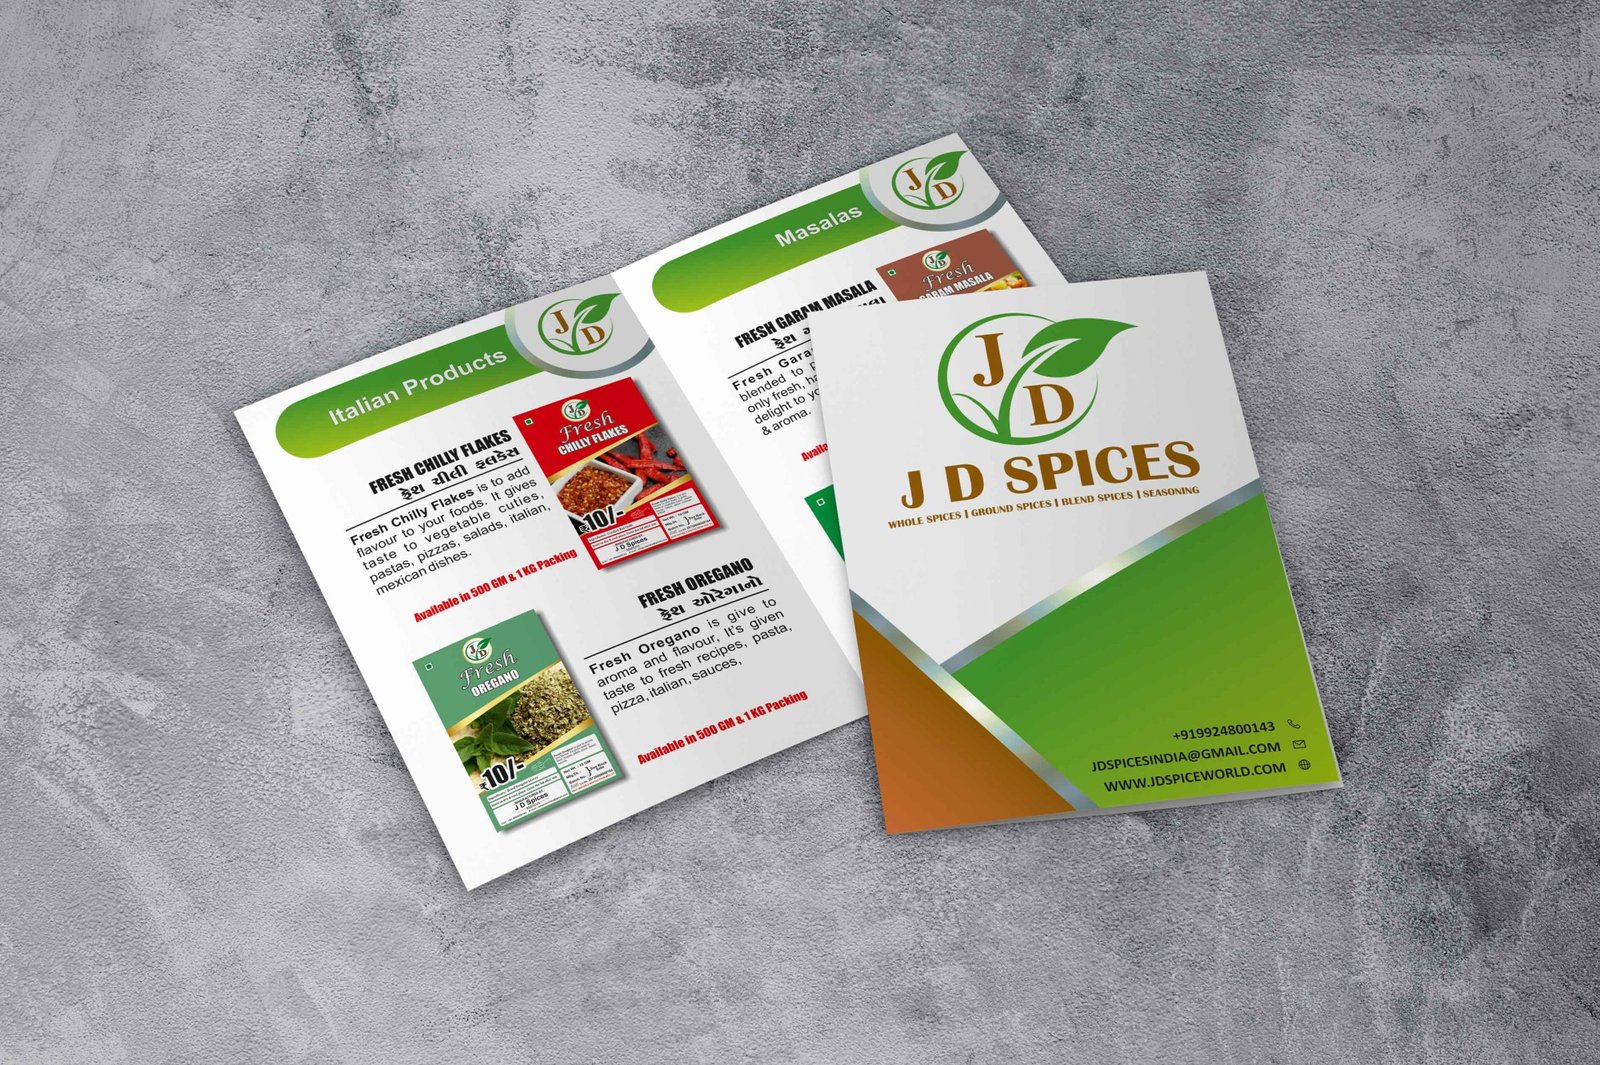 Spices company products brochure design by badri design